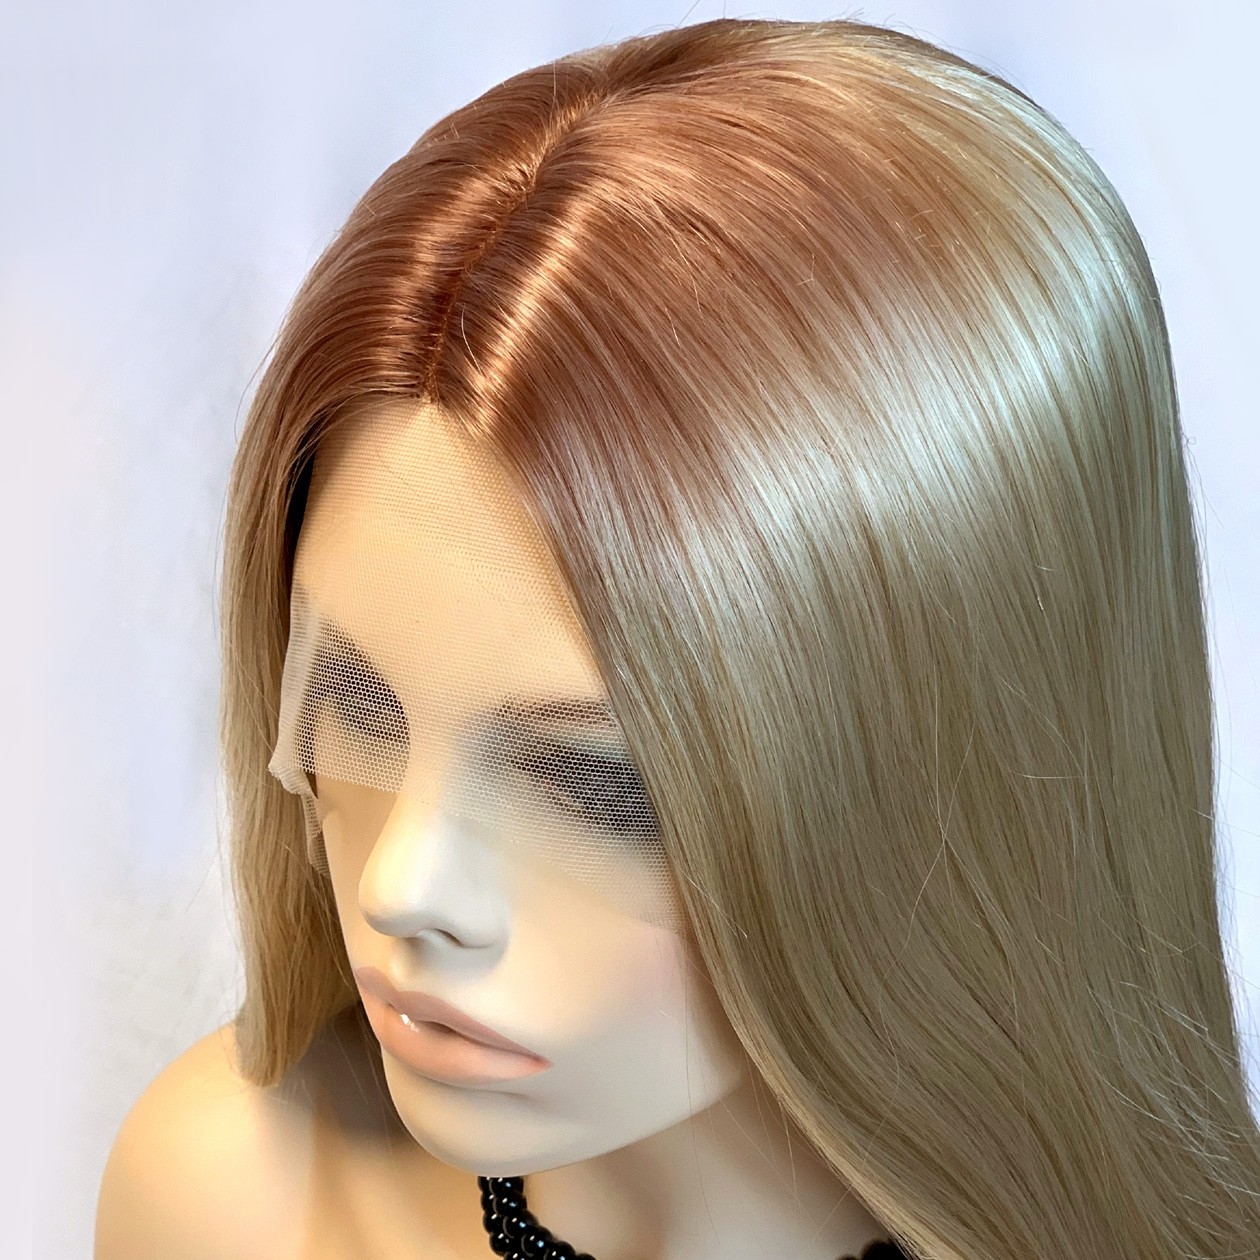 Wiwigs - Wiwigs Ombre 2 Tones Lace Front Wig Straight Brown Roots Long Blonde  Hair